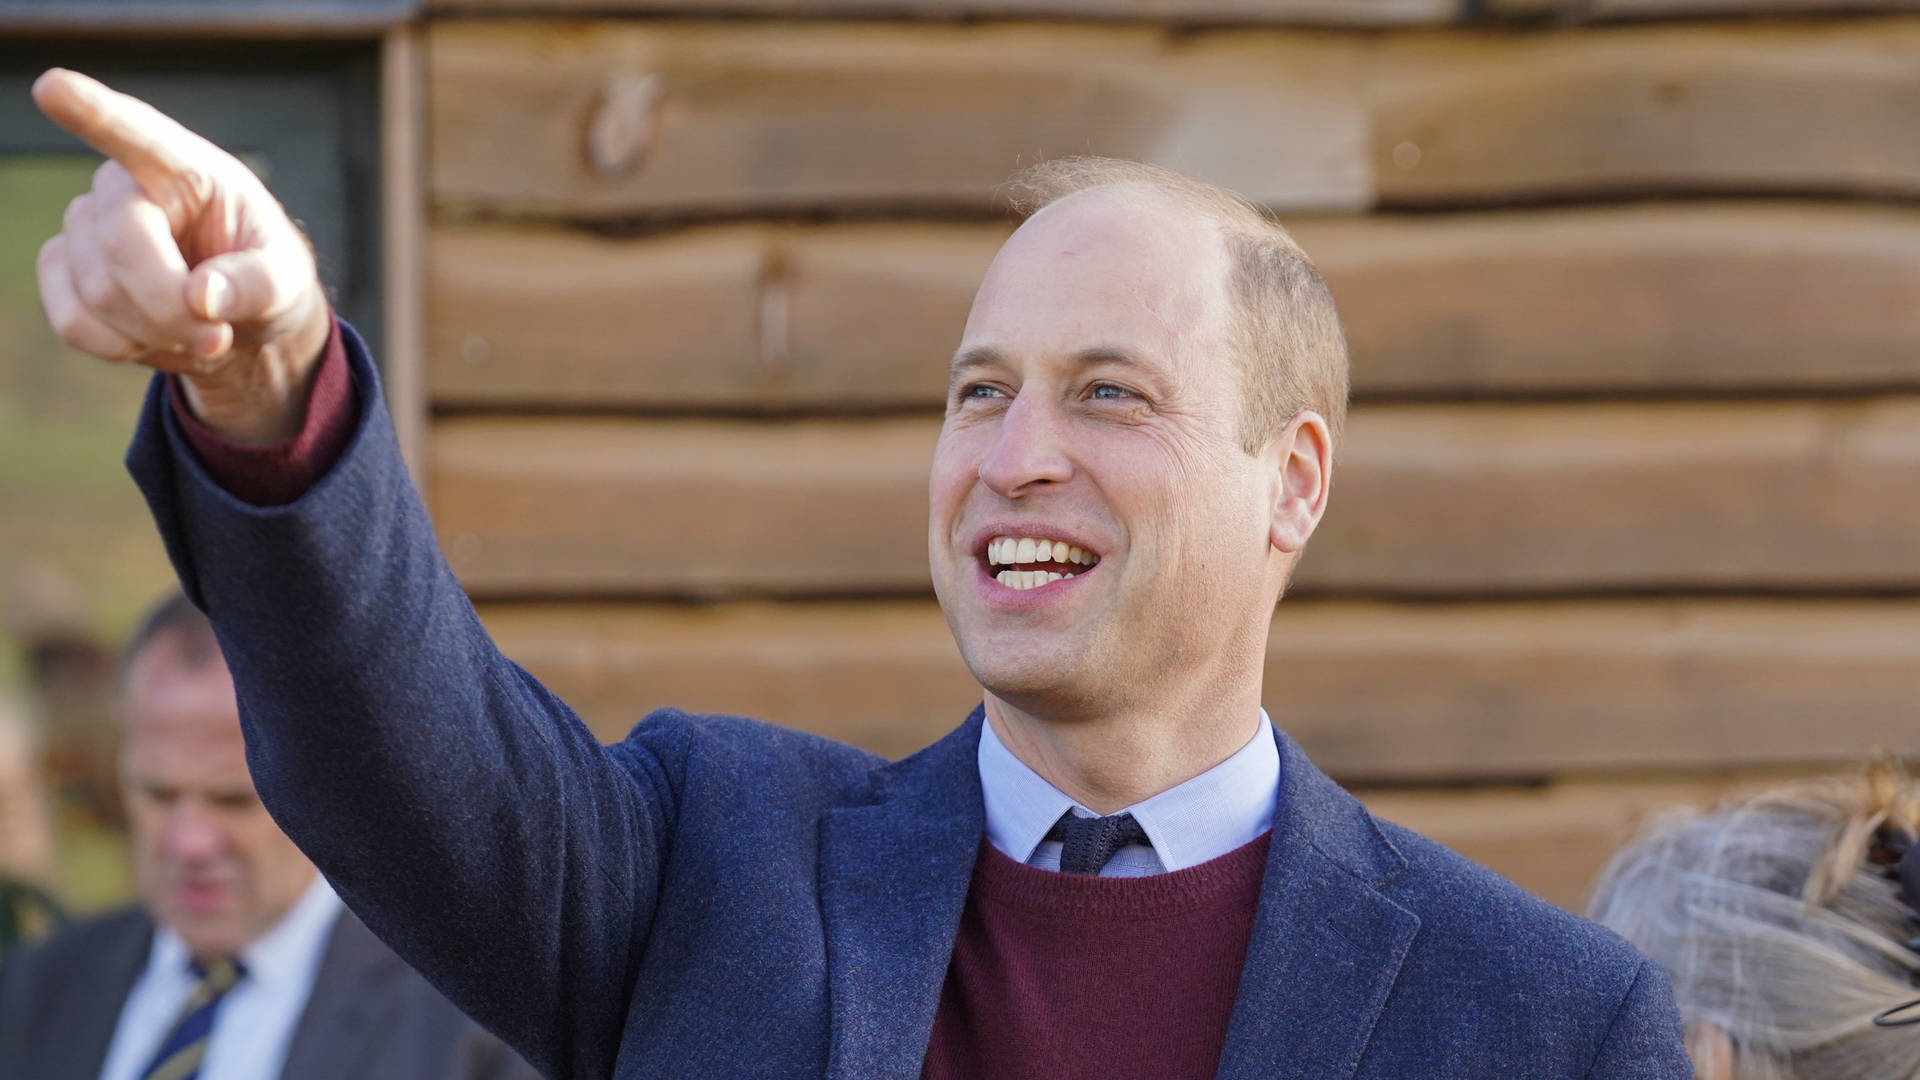 Prince William With A Cheerful Display Of Pointing And Smiling